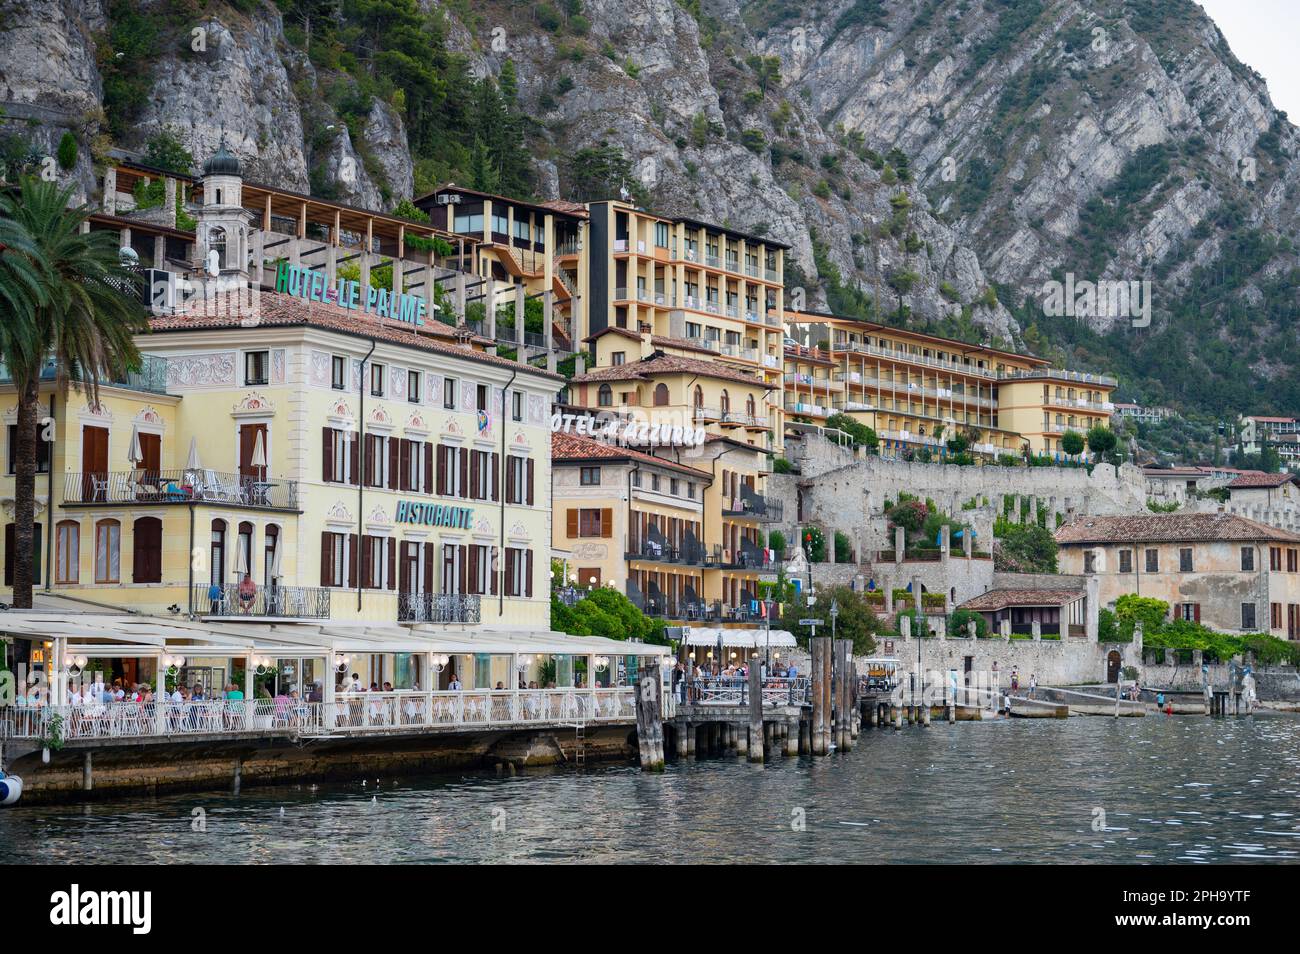 Water front buildings looking out from Limone Sul Garde, a popular town on the shore of Lake Garda, Italy Stock Photo